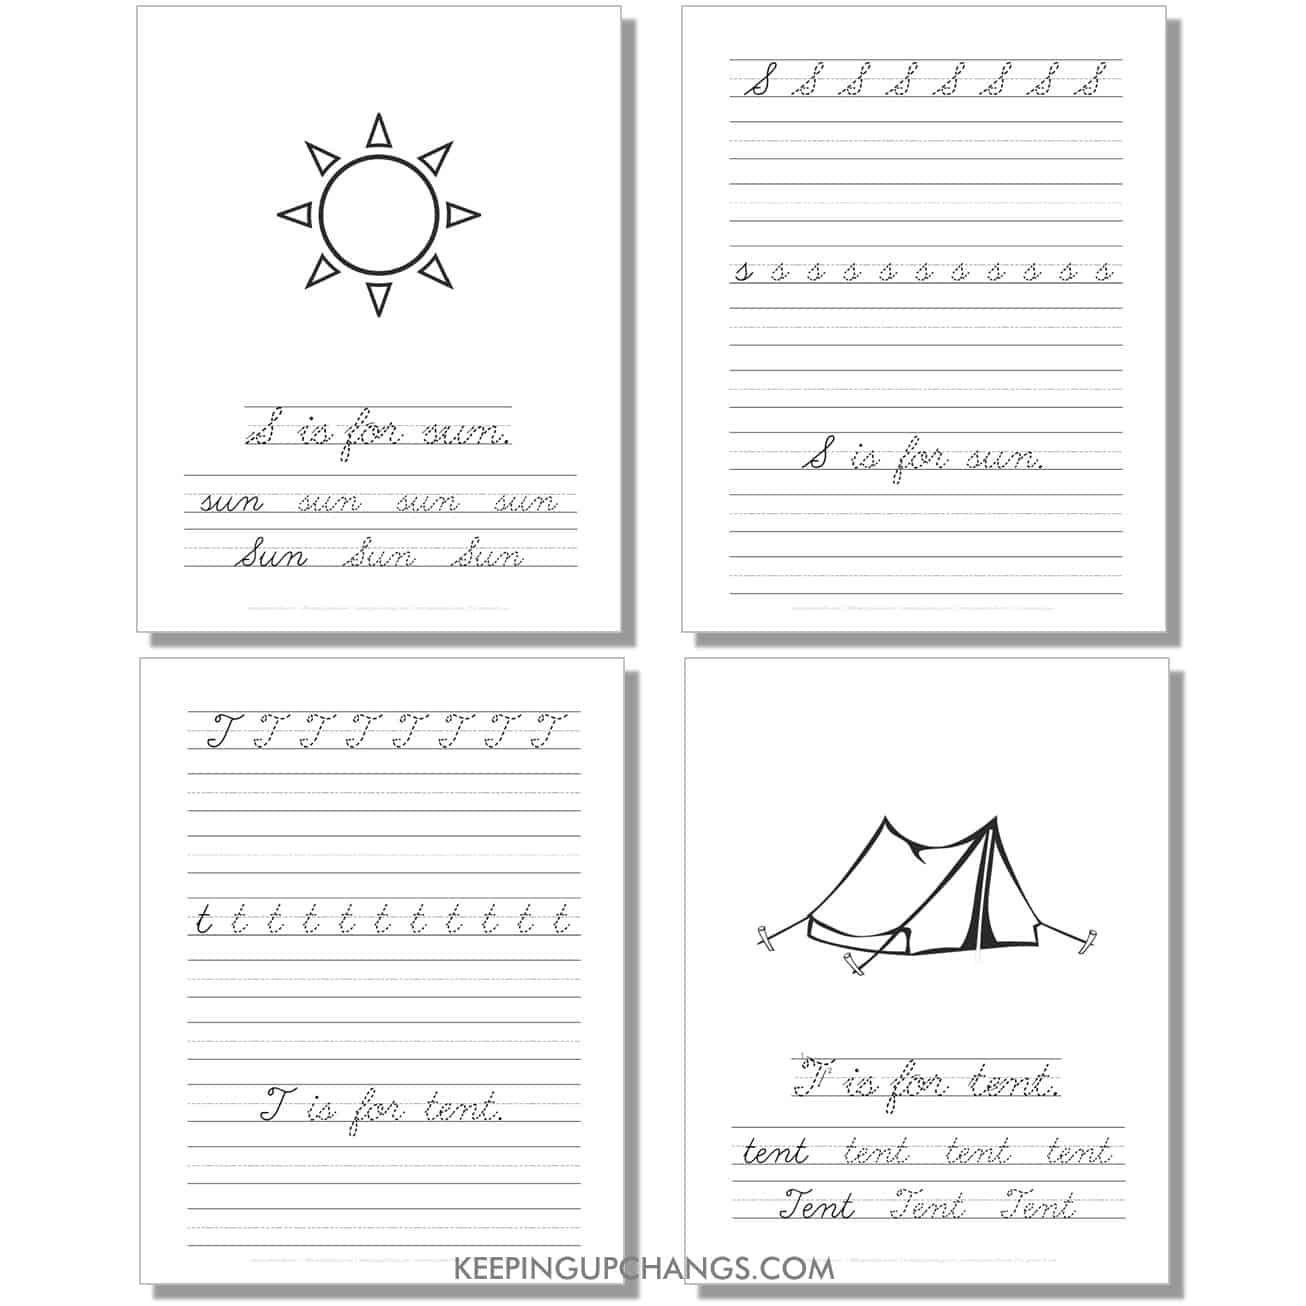 cursive worksheet with uppercase, lowercase letters, sentence for s, t.